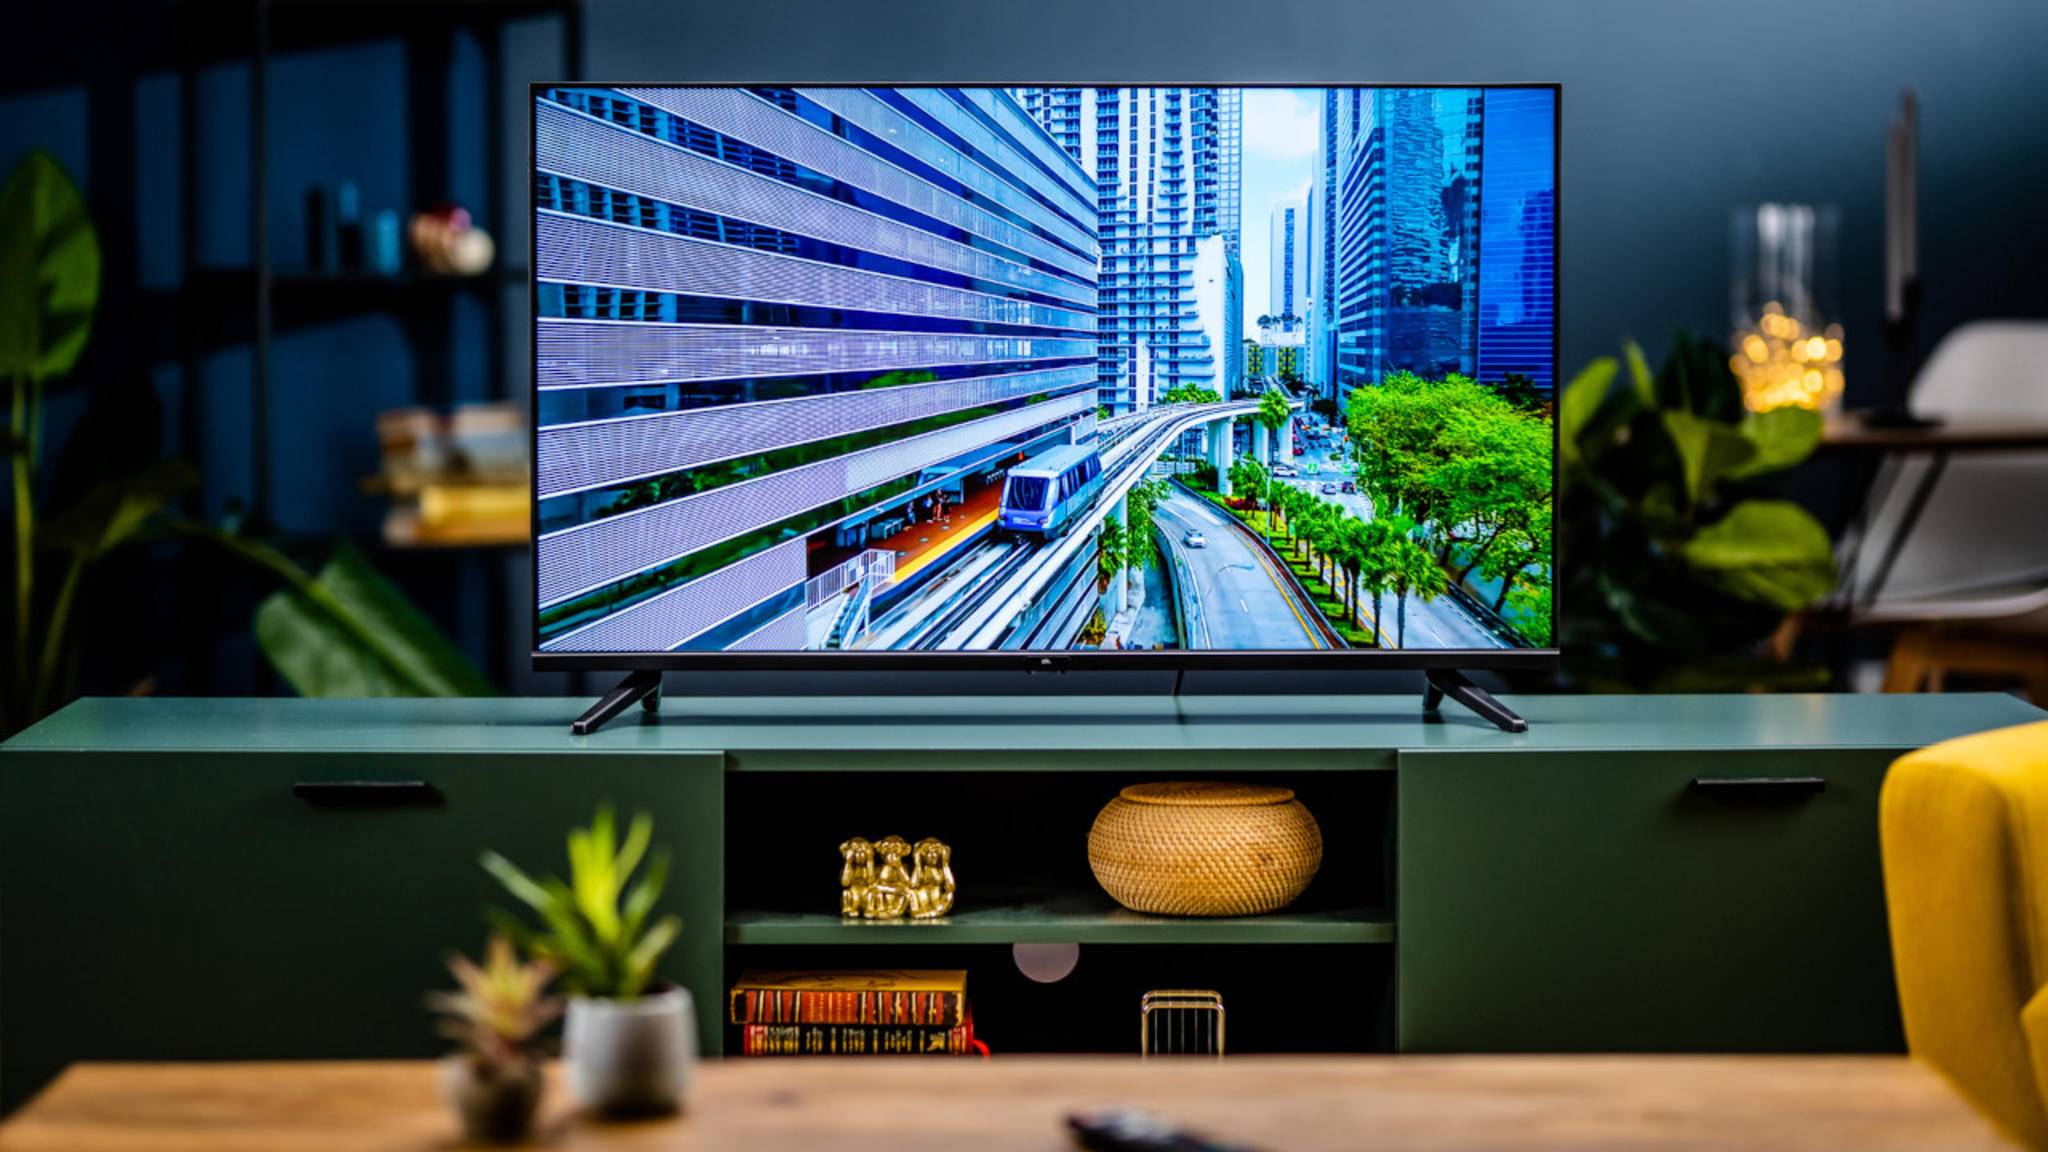 40 inch TV stands on a TV stand.  It shows a bright blue image.